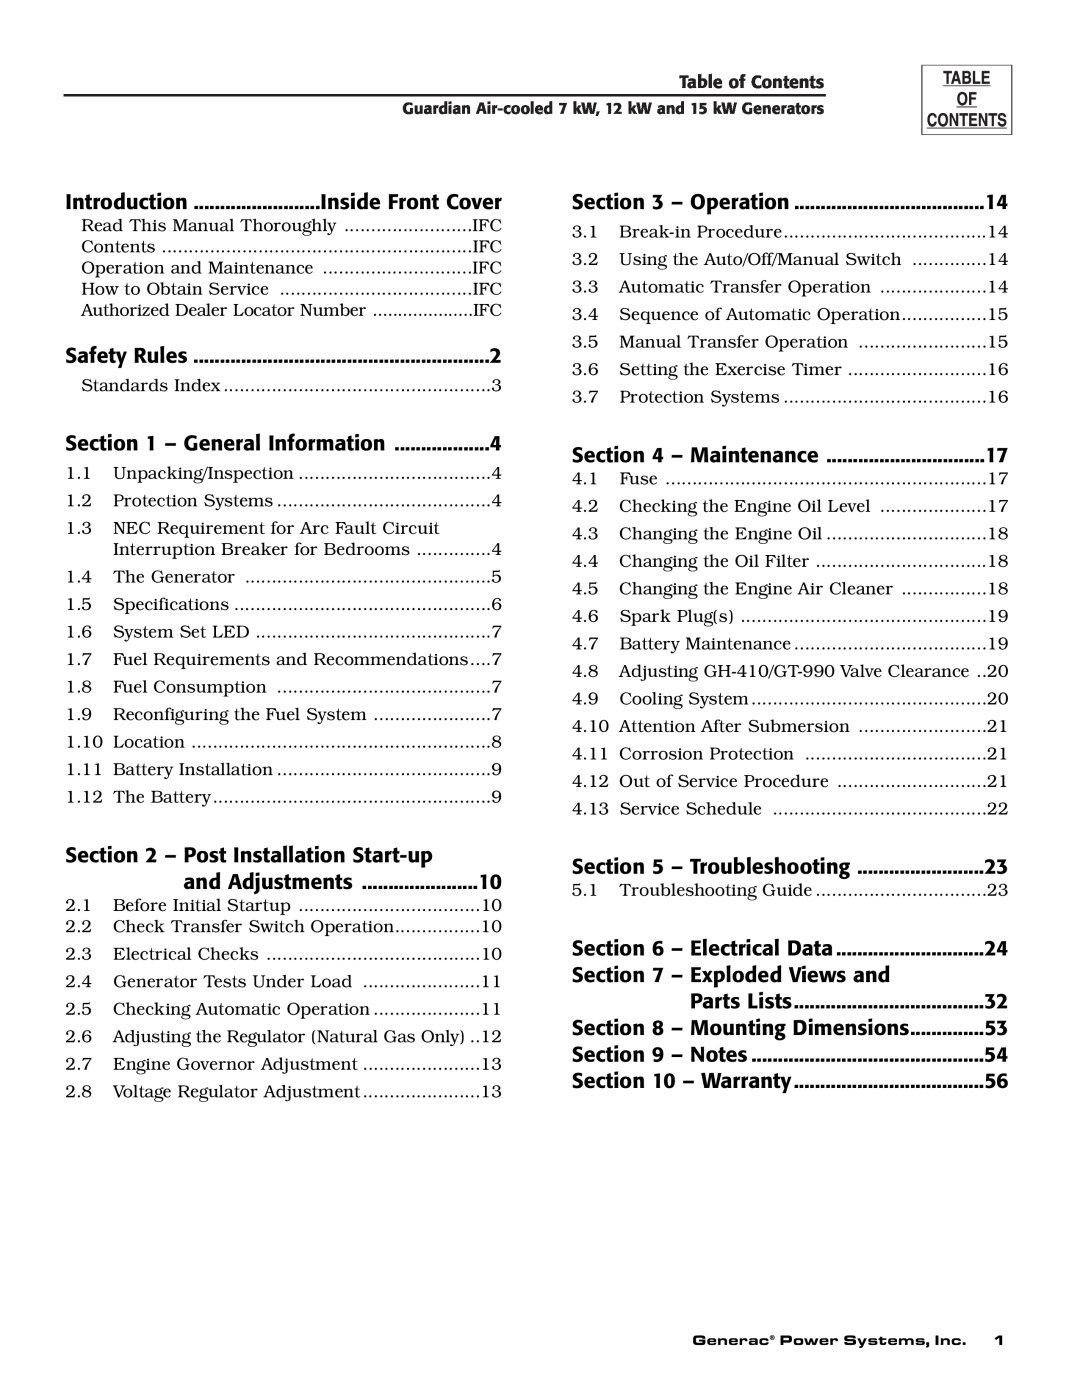 Guardian Technologies 04389-2, 04456-2, 04390-2 owner manual Safety Rules, Table of Contents 